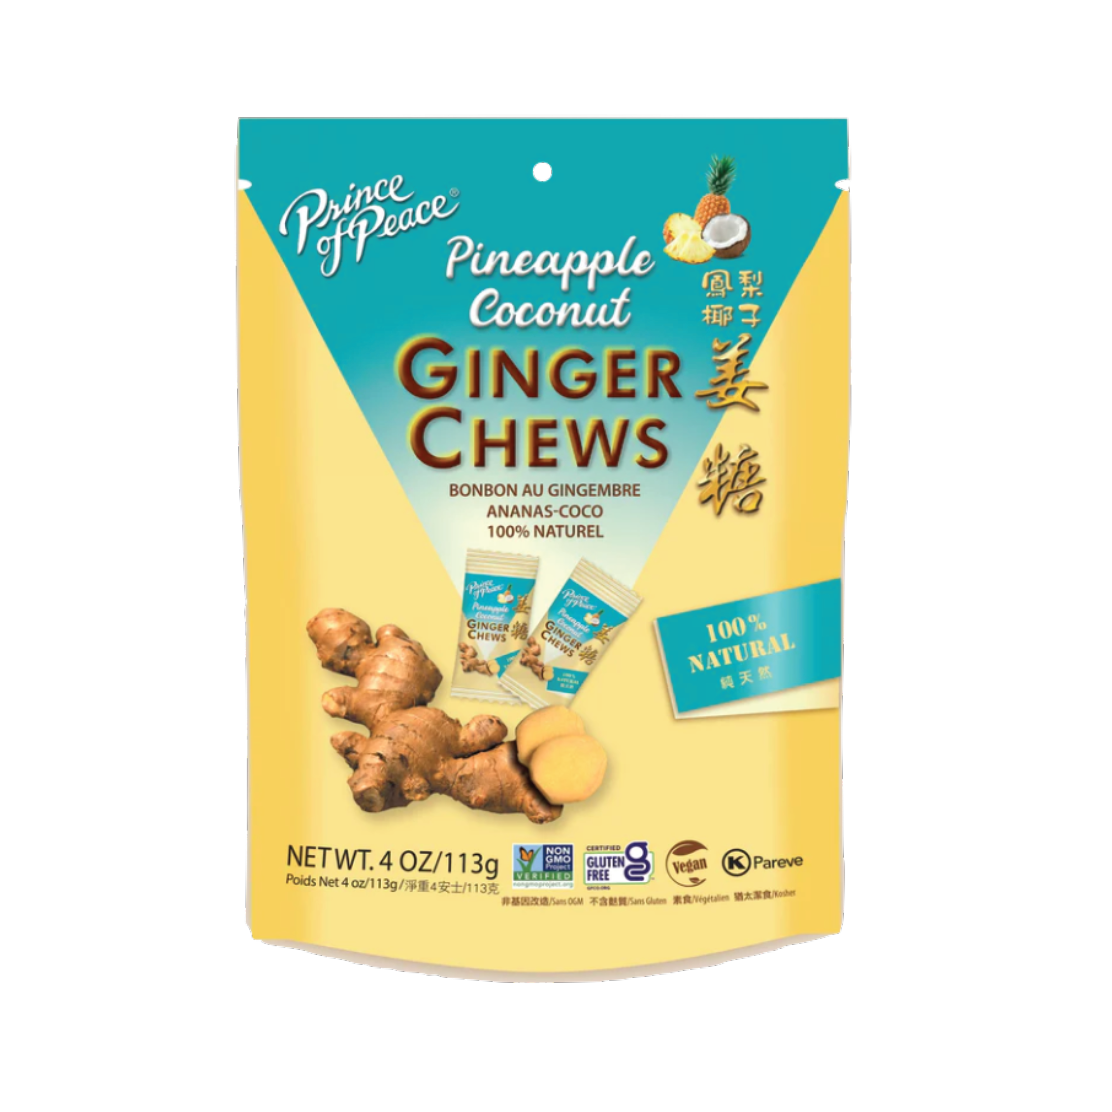 Picture Prince Of Peace Ginger Chews with Pineapple & Coconut